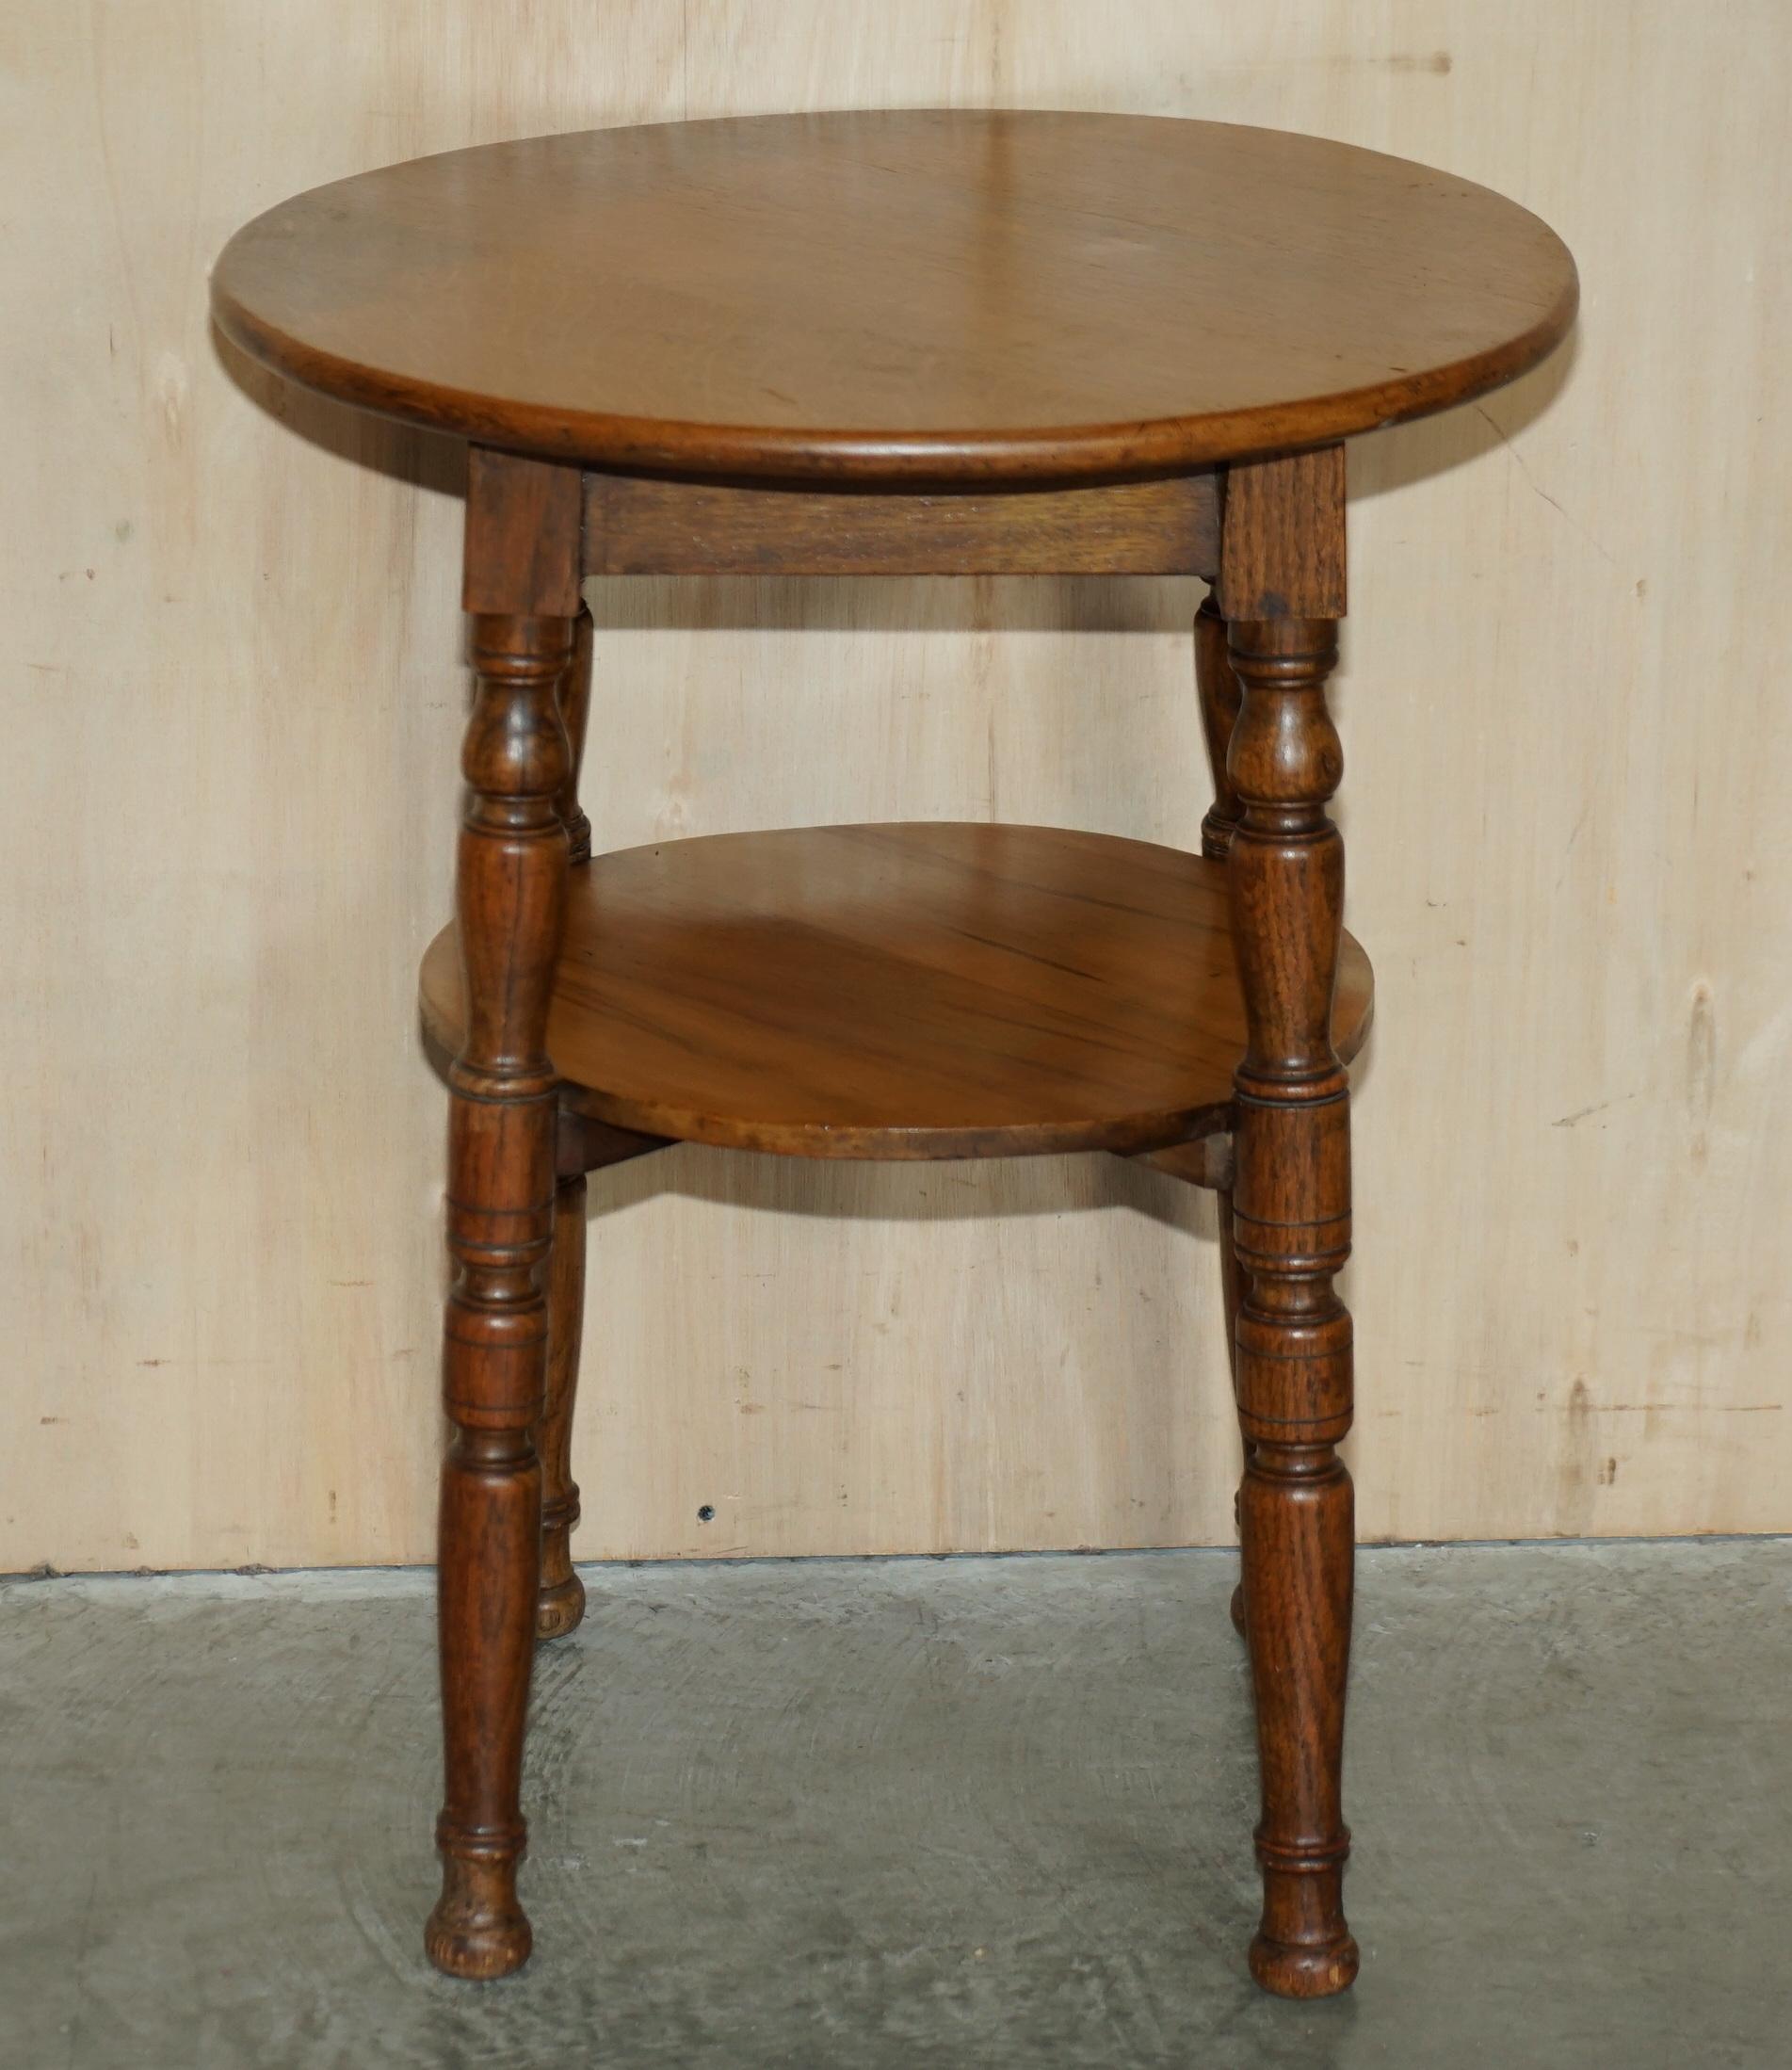 Lovely circa 1900 English Oak Side Table with Turned Legs and a Nice Rich Patina For Sale 7